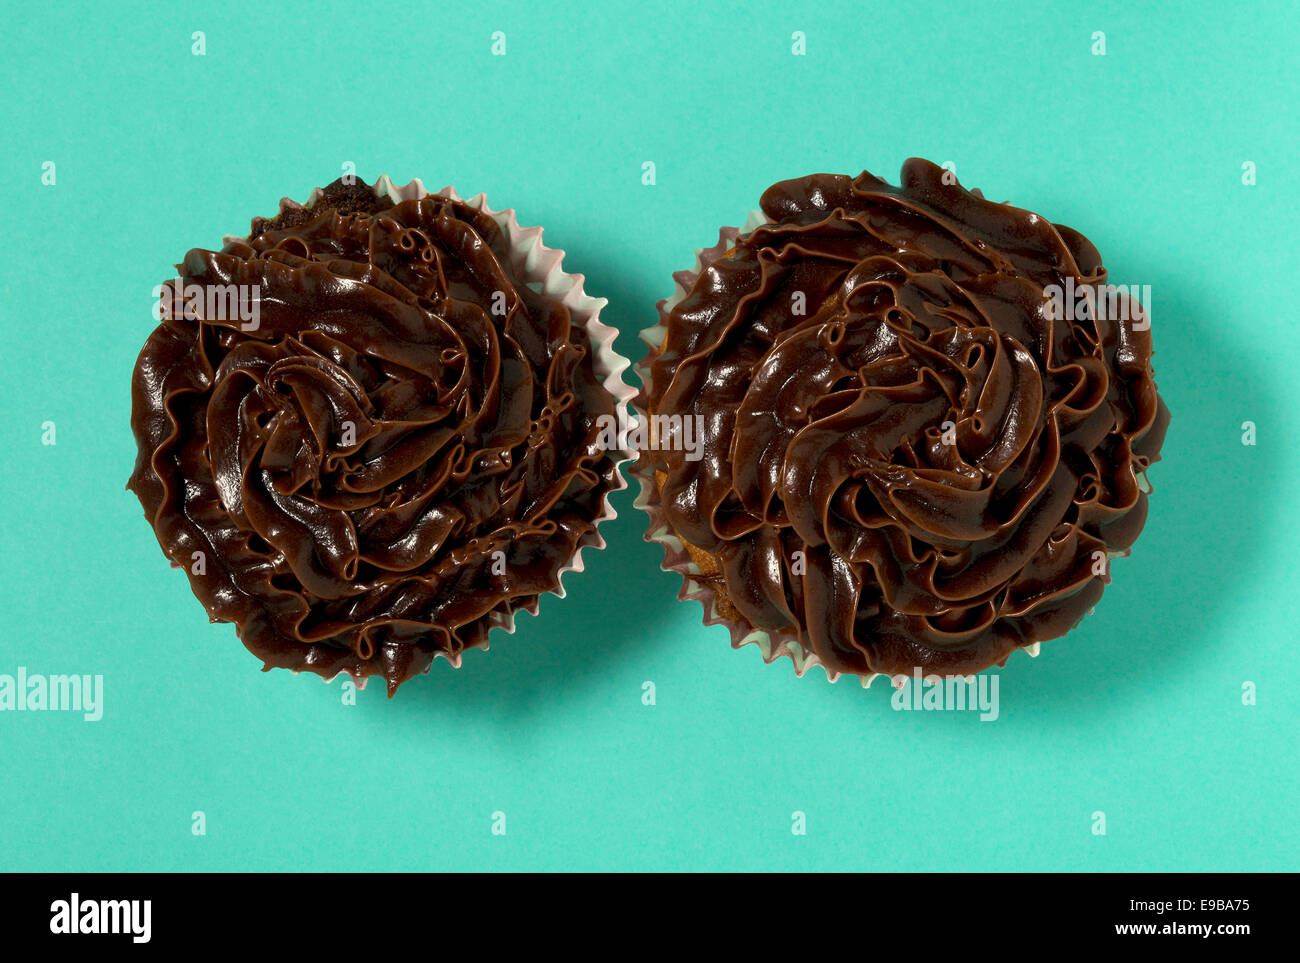 Two chocolate cupcakes on a turquoise background Stock Photo